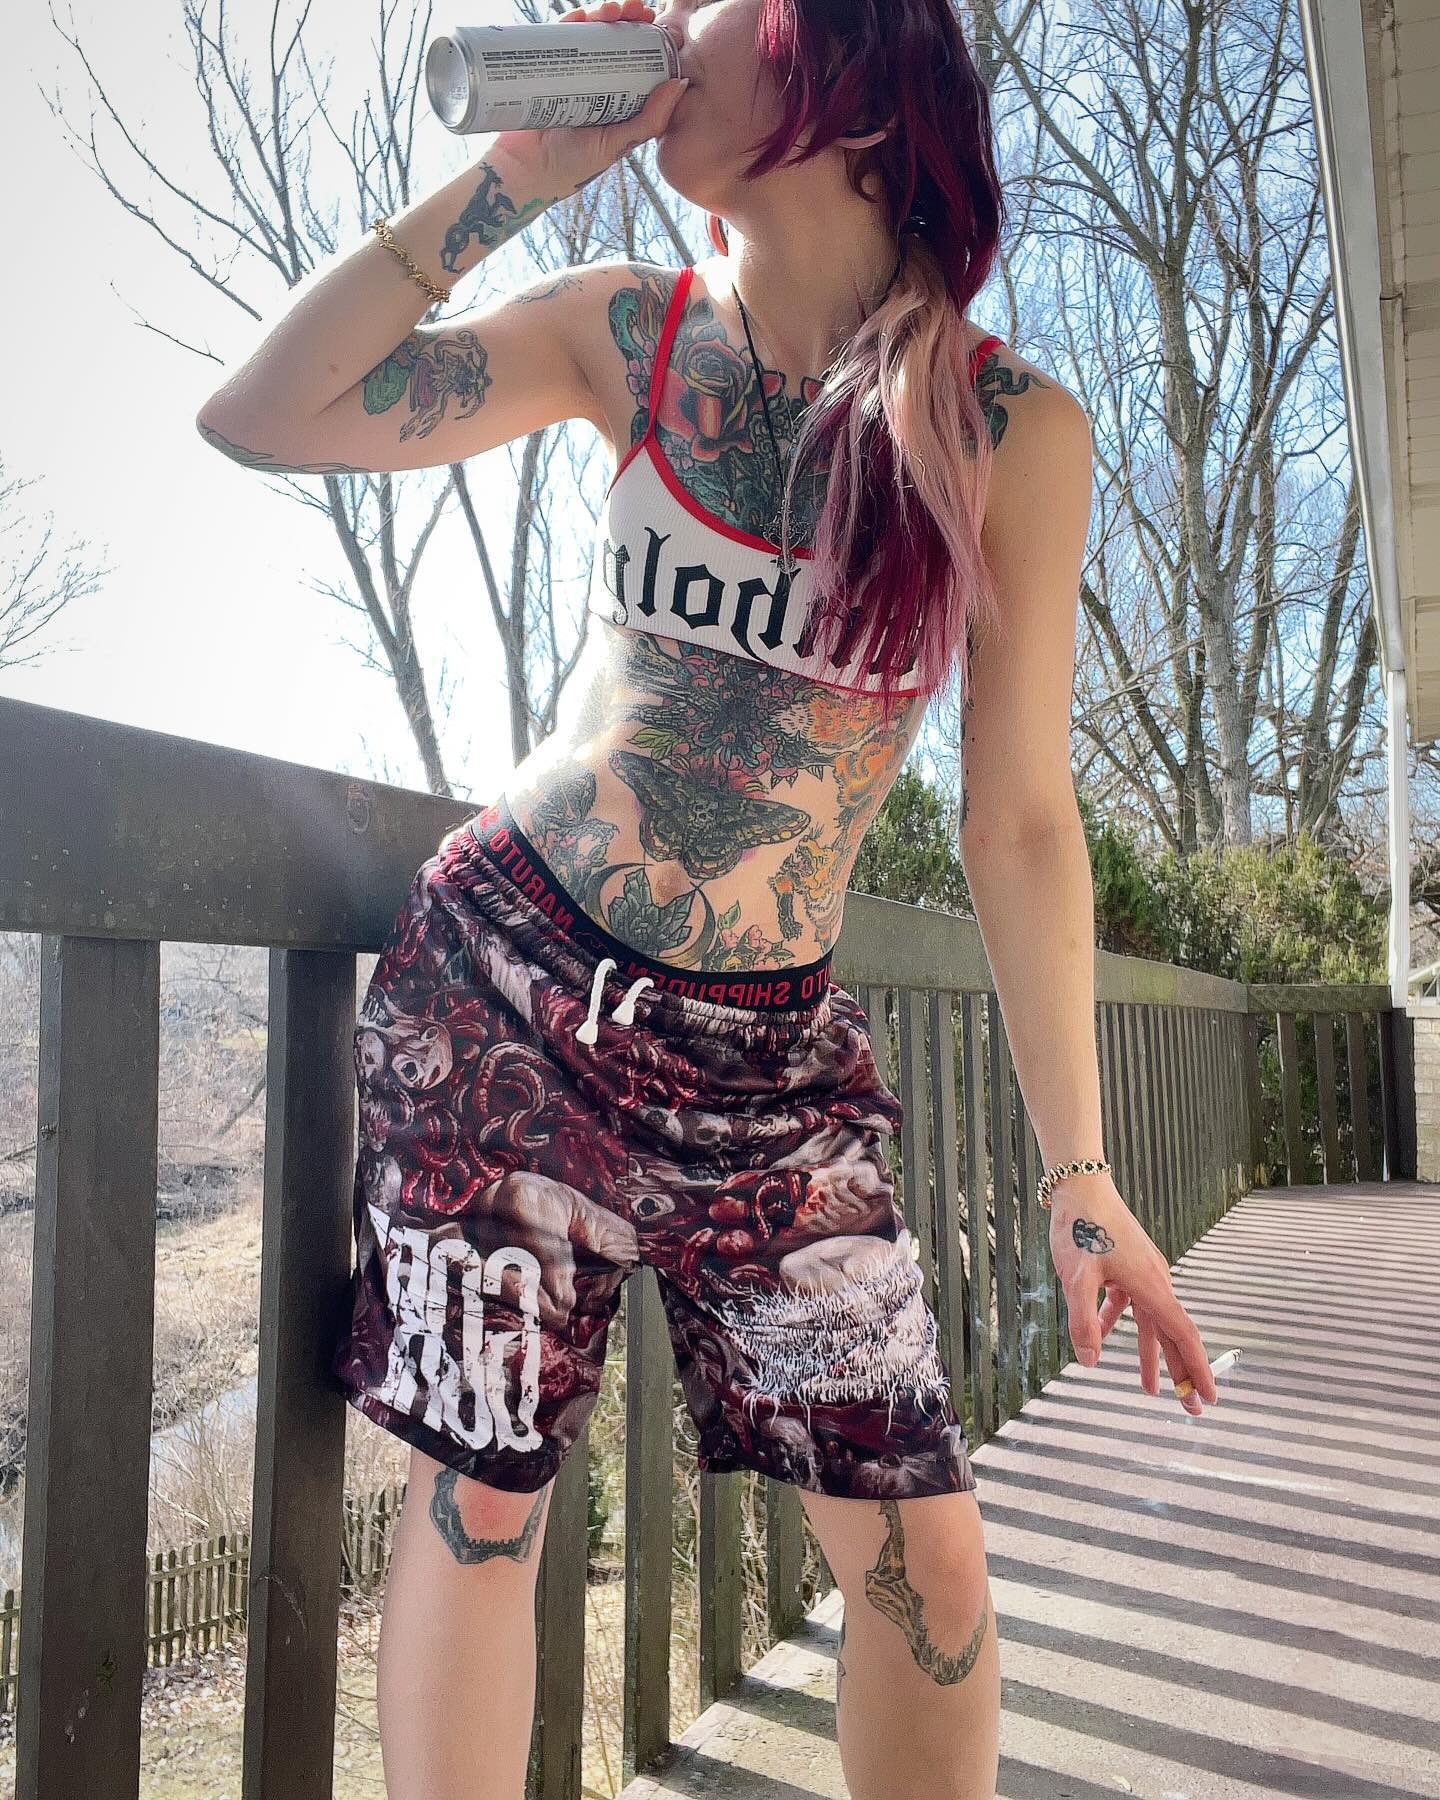 when it’s 65 in february and you live in the midwest 
shorts: @ftolrecords 
✨
✨
✨
#midwest #midwestliving #65 #fattuboflardrecords #tattoos #splithair #splitdye #redandblonde #unholy #slam #kneetattoos #torsotattoo #piercings #stretchcedears #stretchedseptum #whiteclaw #daydrinking #fyp